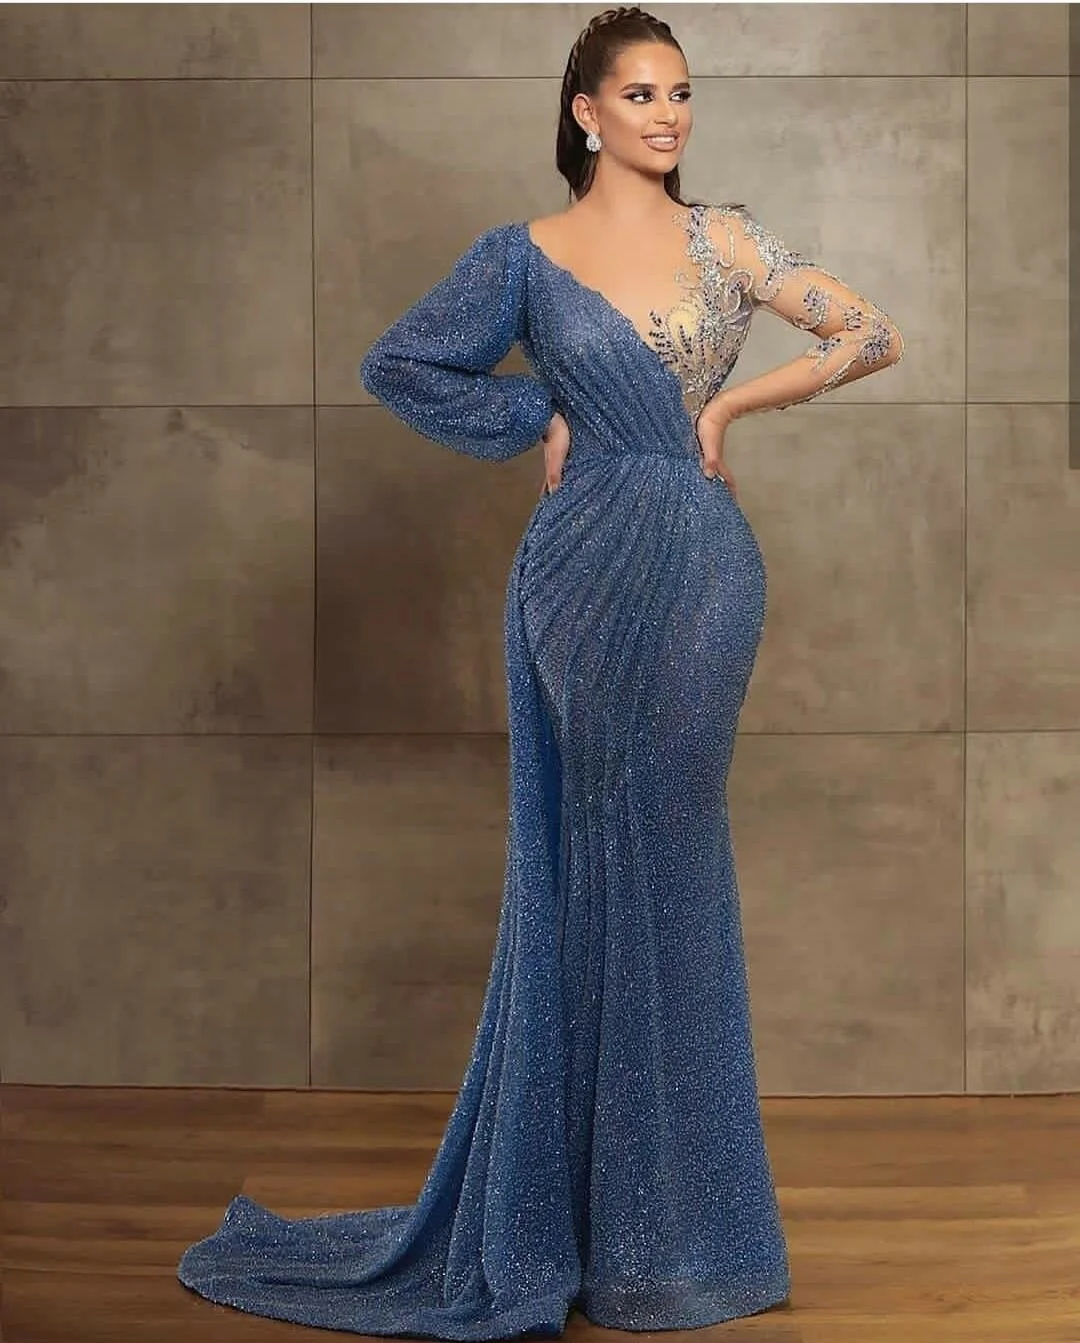 Blue Evening Gowns Sheer Jewel Neck Beaded Lace Long Sleeve Mermaid Prom Dress Sweep Train Custom Made Illusion Robes De Soirée